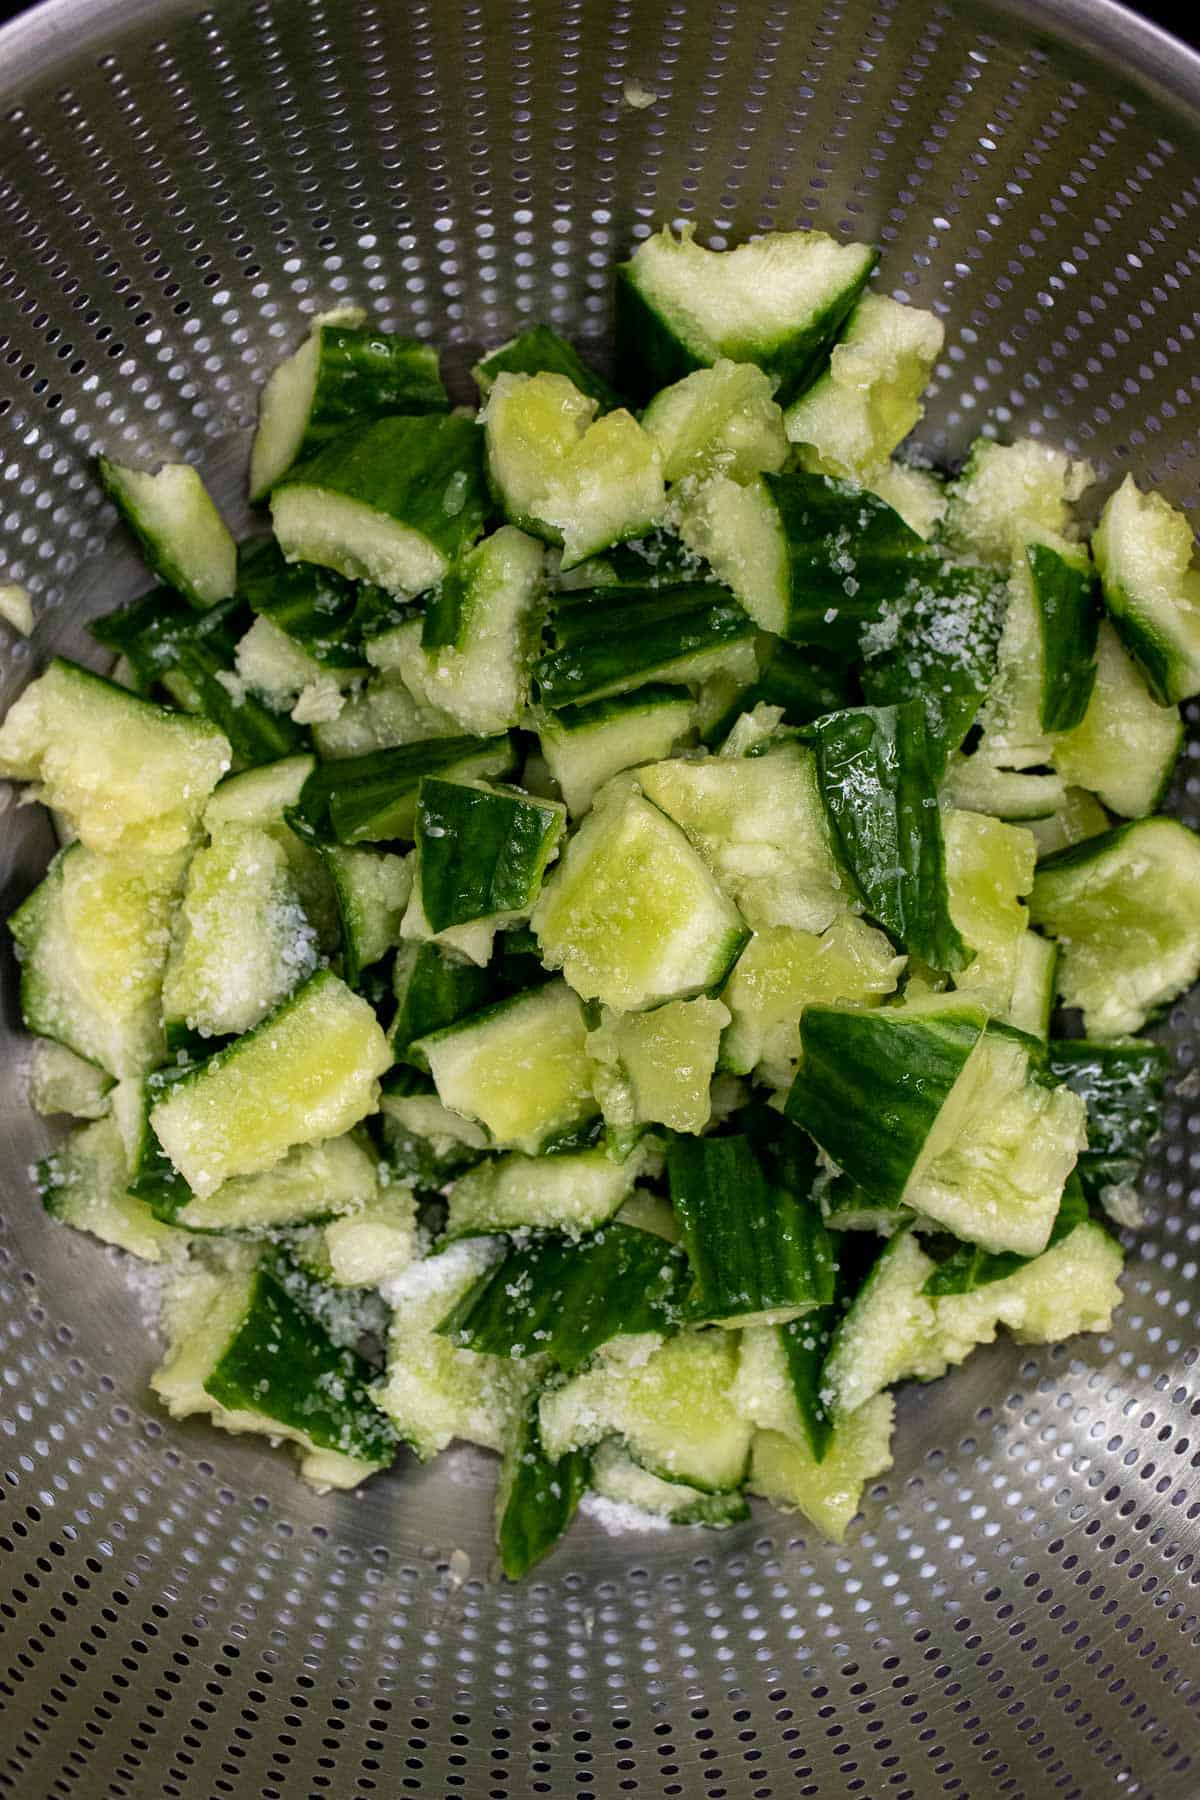 Smashed and torn apart cucumber pieces tossed with salt and draining in a colander.